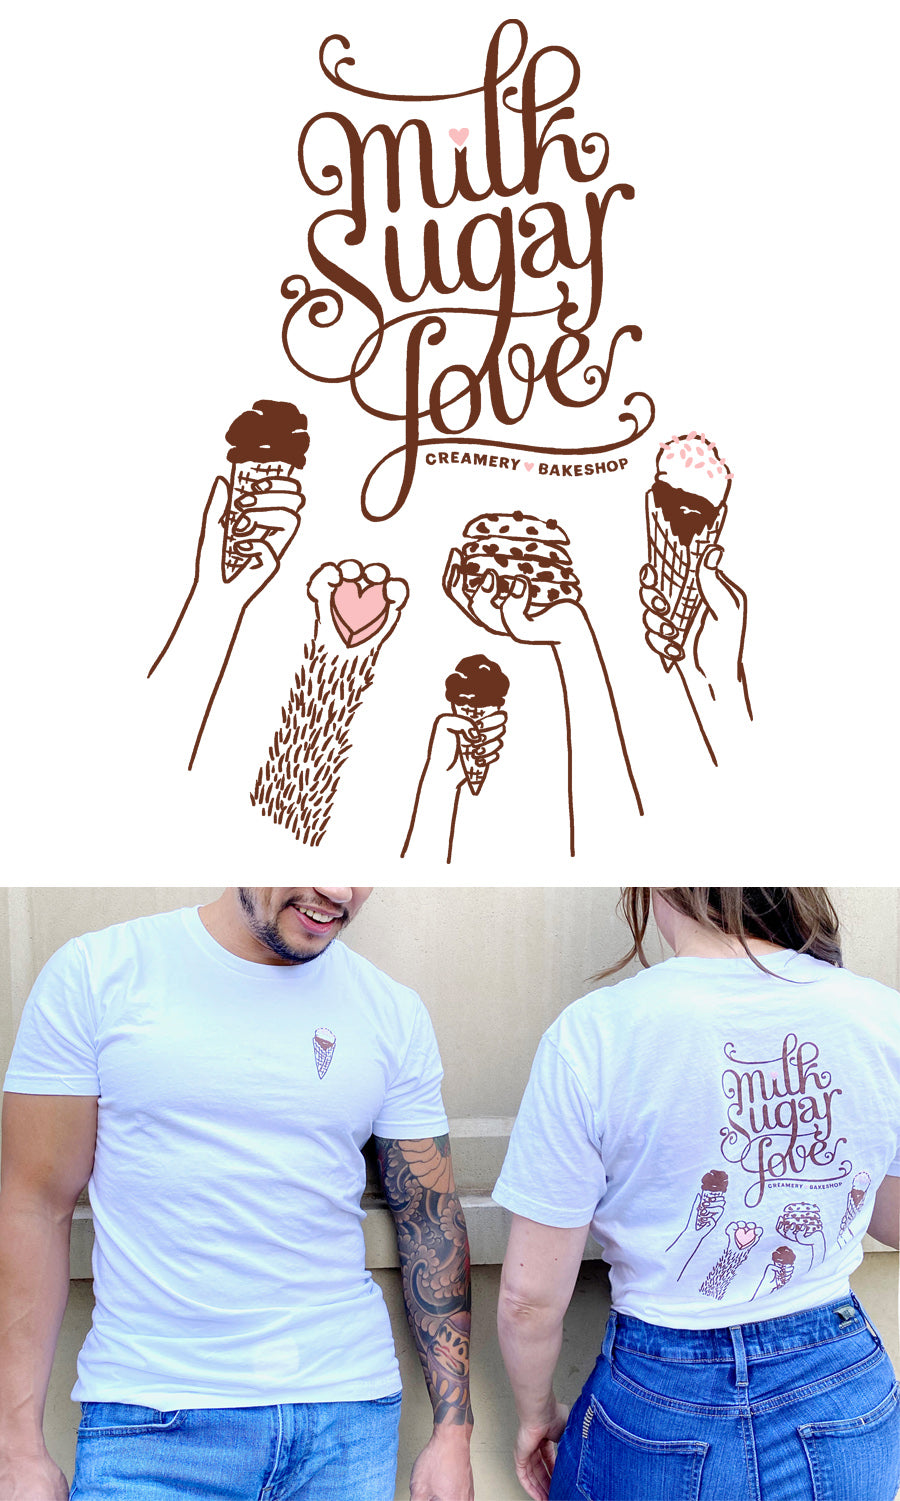 Top: "Milk Sugar Love Creamery & Bakeshop" logo in brown and pink with 4 hands reaching up holding ice cream cones, cookies, kiddie cone, one dog paw holding a pink heart puppy fro-yo. Below: photo of man and woman wearing t-shirts with the illustration